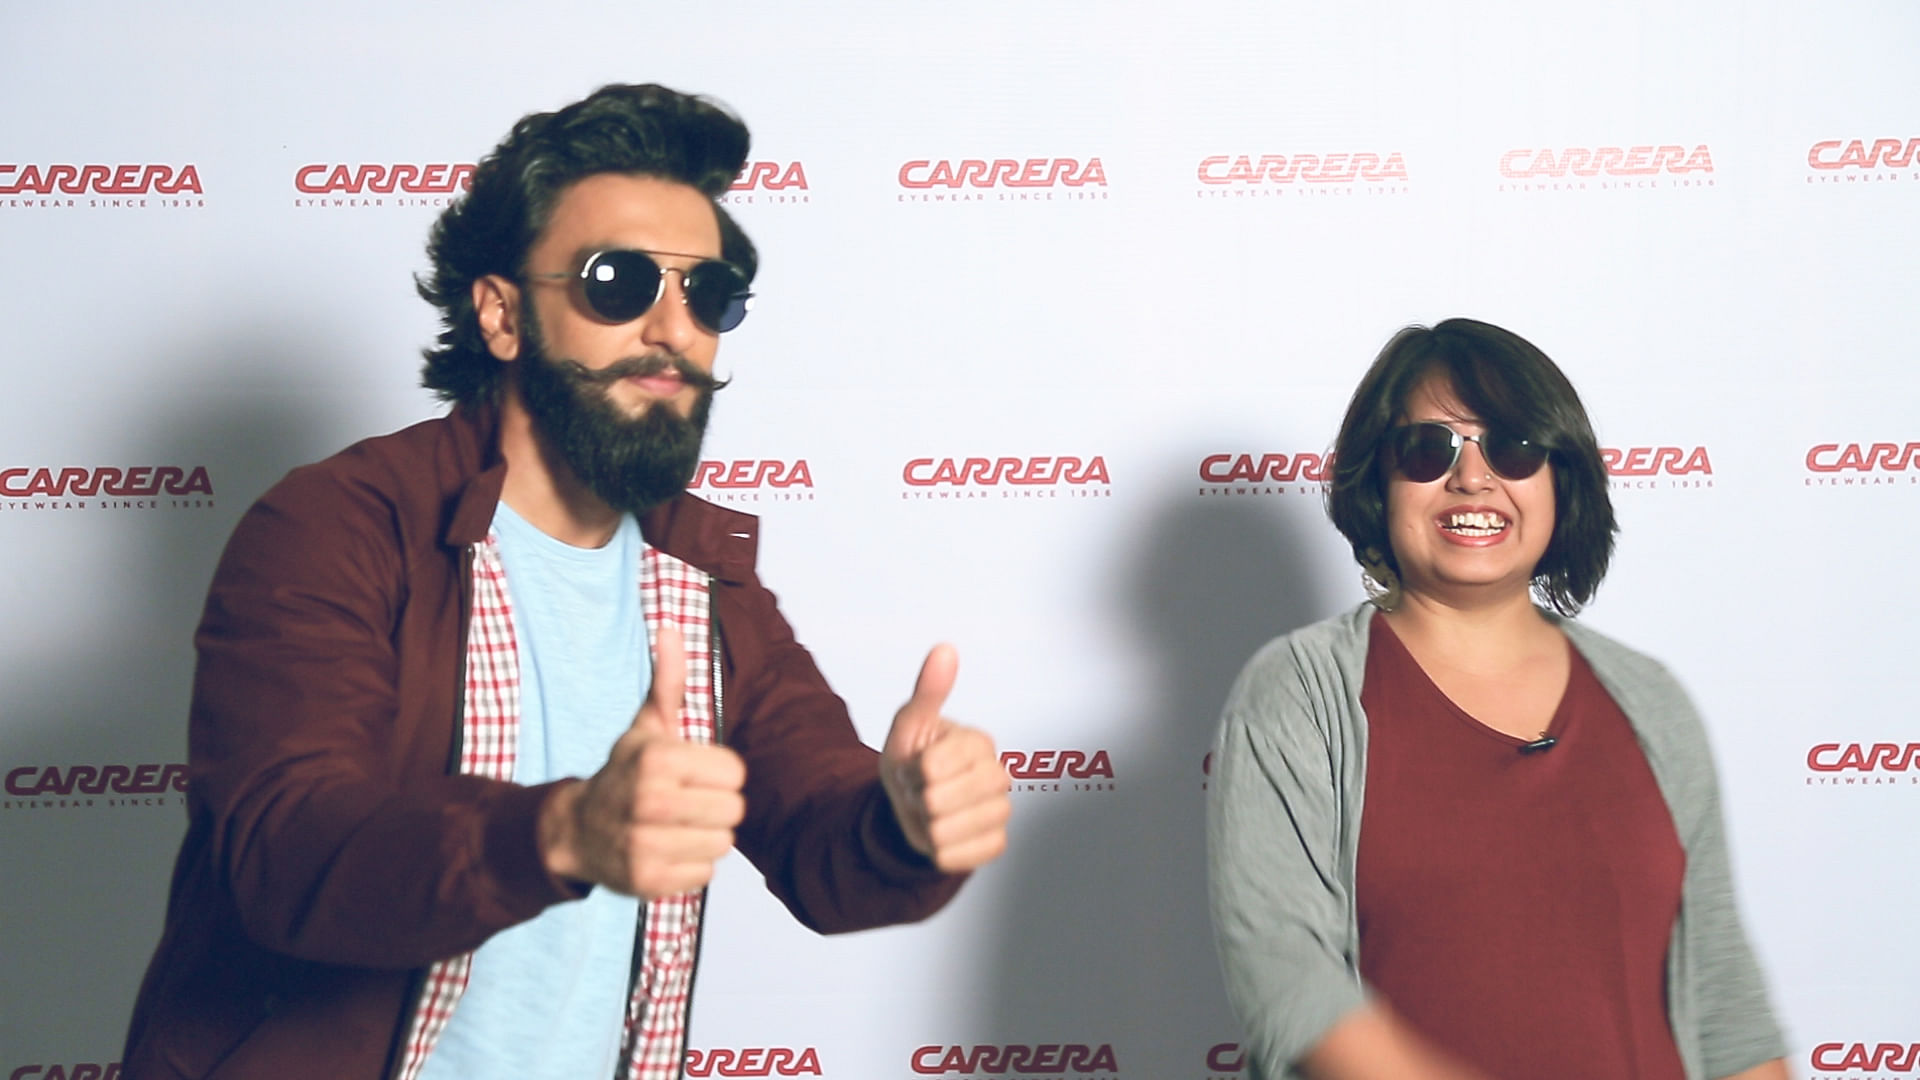 Ranveer Singh is here to tell you the difference between ‘chashma’ and ‘chachma’, that we bet you didn’t know.